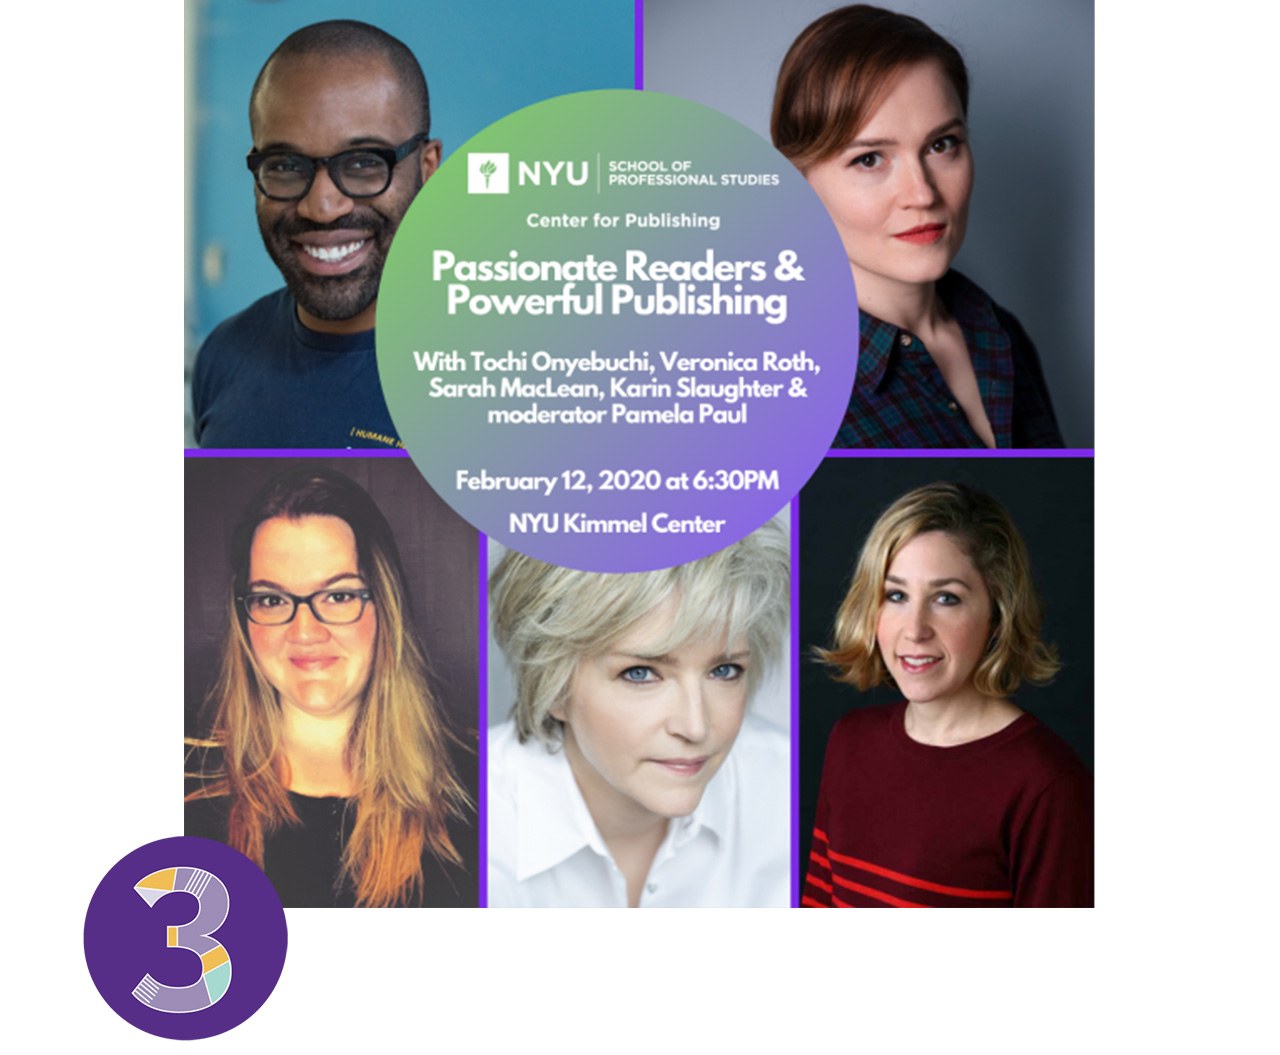 A poster for an upcoming event hosted by the NYU School of Professional Studies Center for Publishing, titled “Passionate Readers, Powerful Publishing: Reaching Niche Audiences in New Ways,” featuring headshots of the panel members.